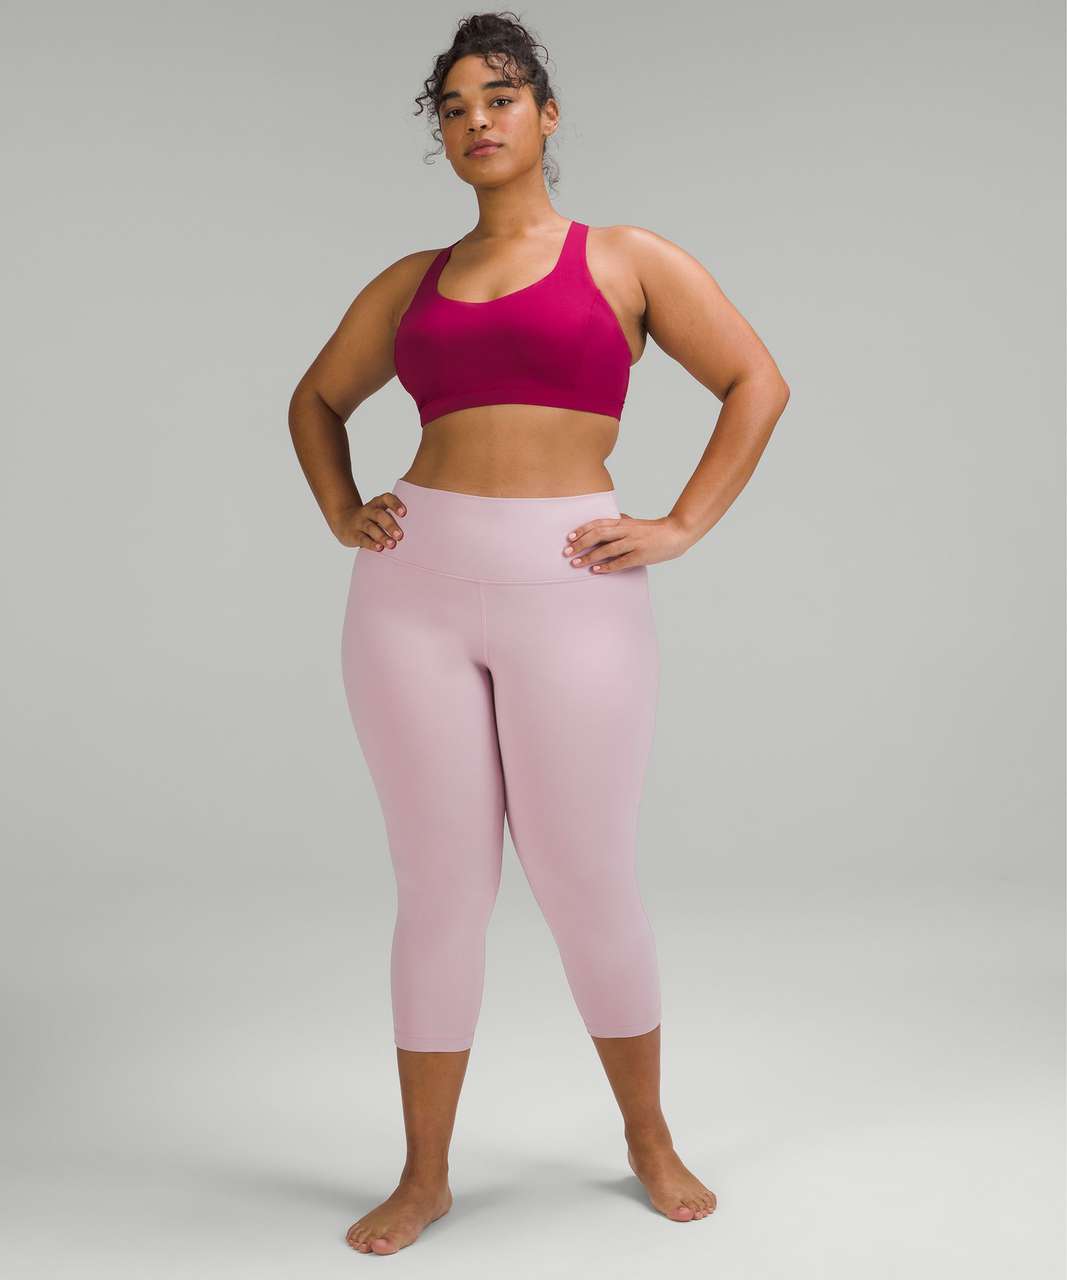 Align 25 Leggings with Pockets in Vivid Plum (2), High Neck Align Tank in  Pink Peony (4) and Relaxed long Sleeve Swiftly (4) in Pink Peony :  r/lululemon